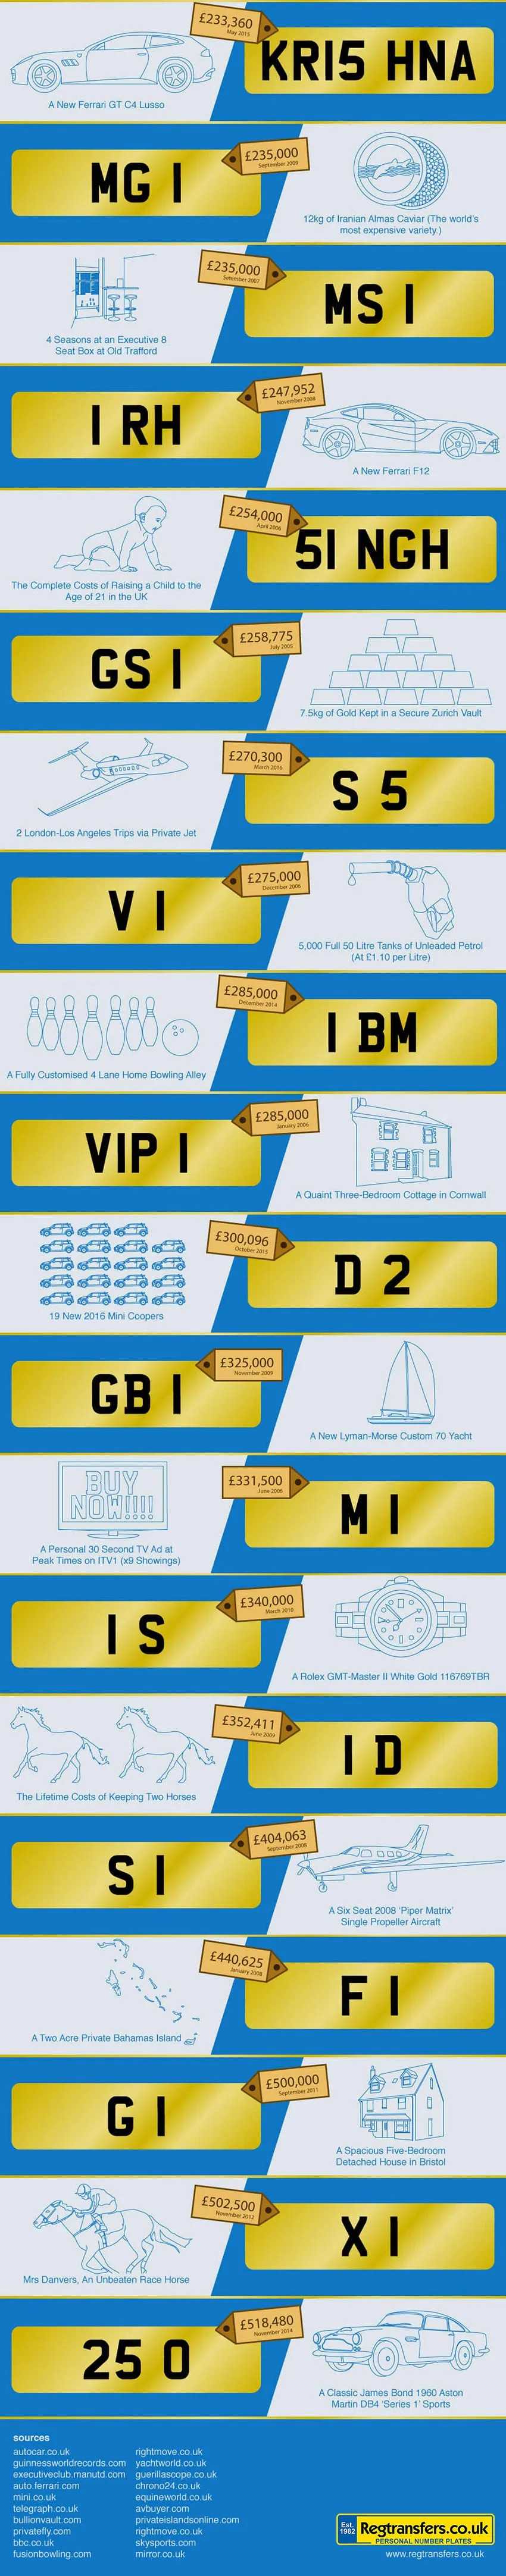 Gold-plated number plates